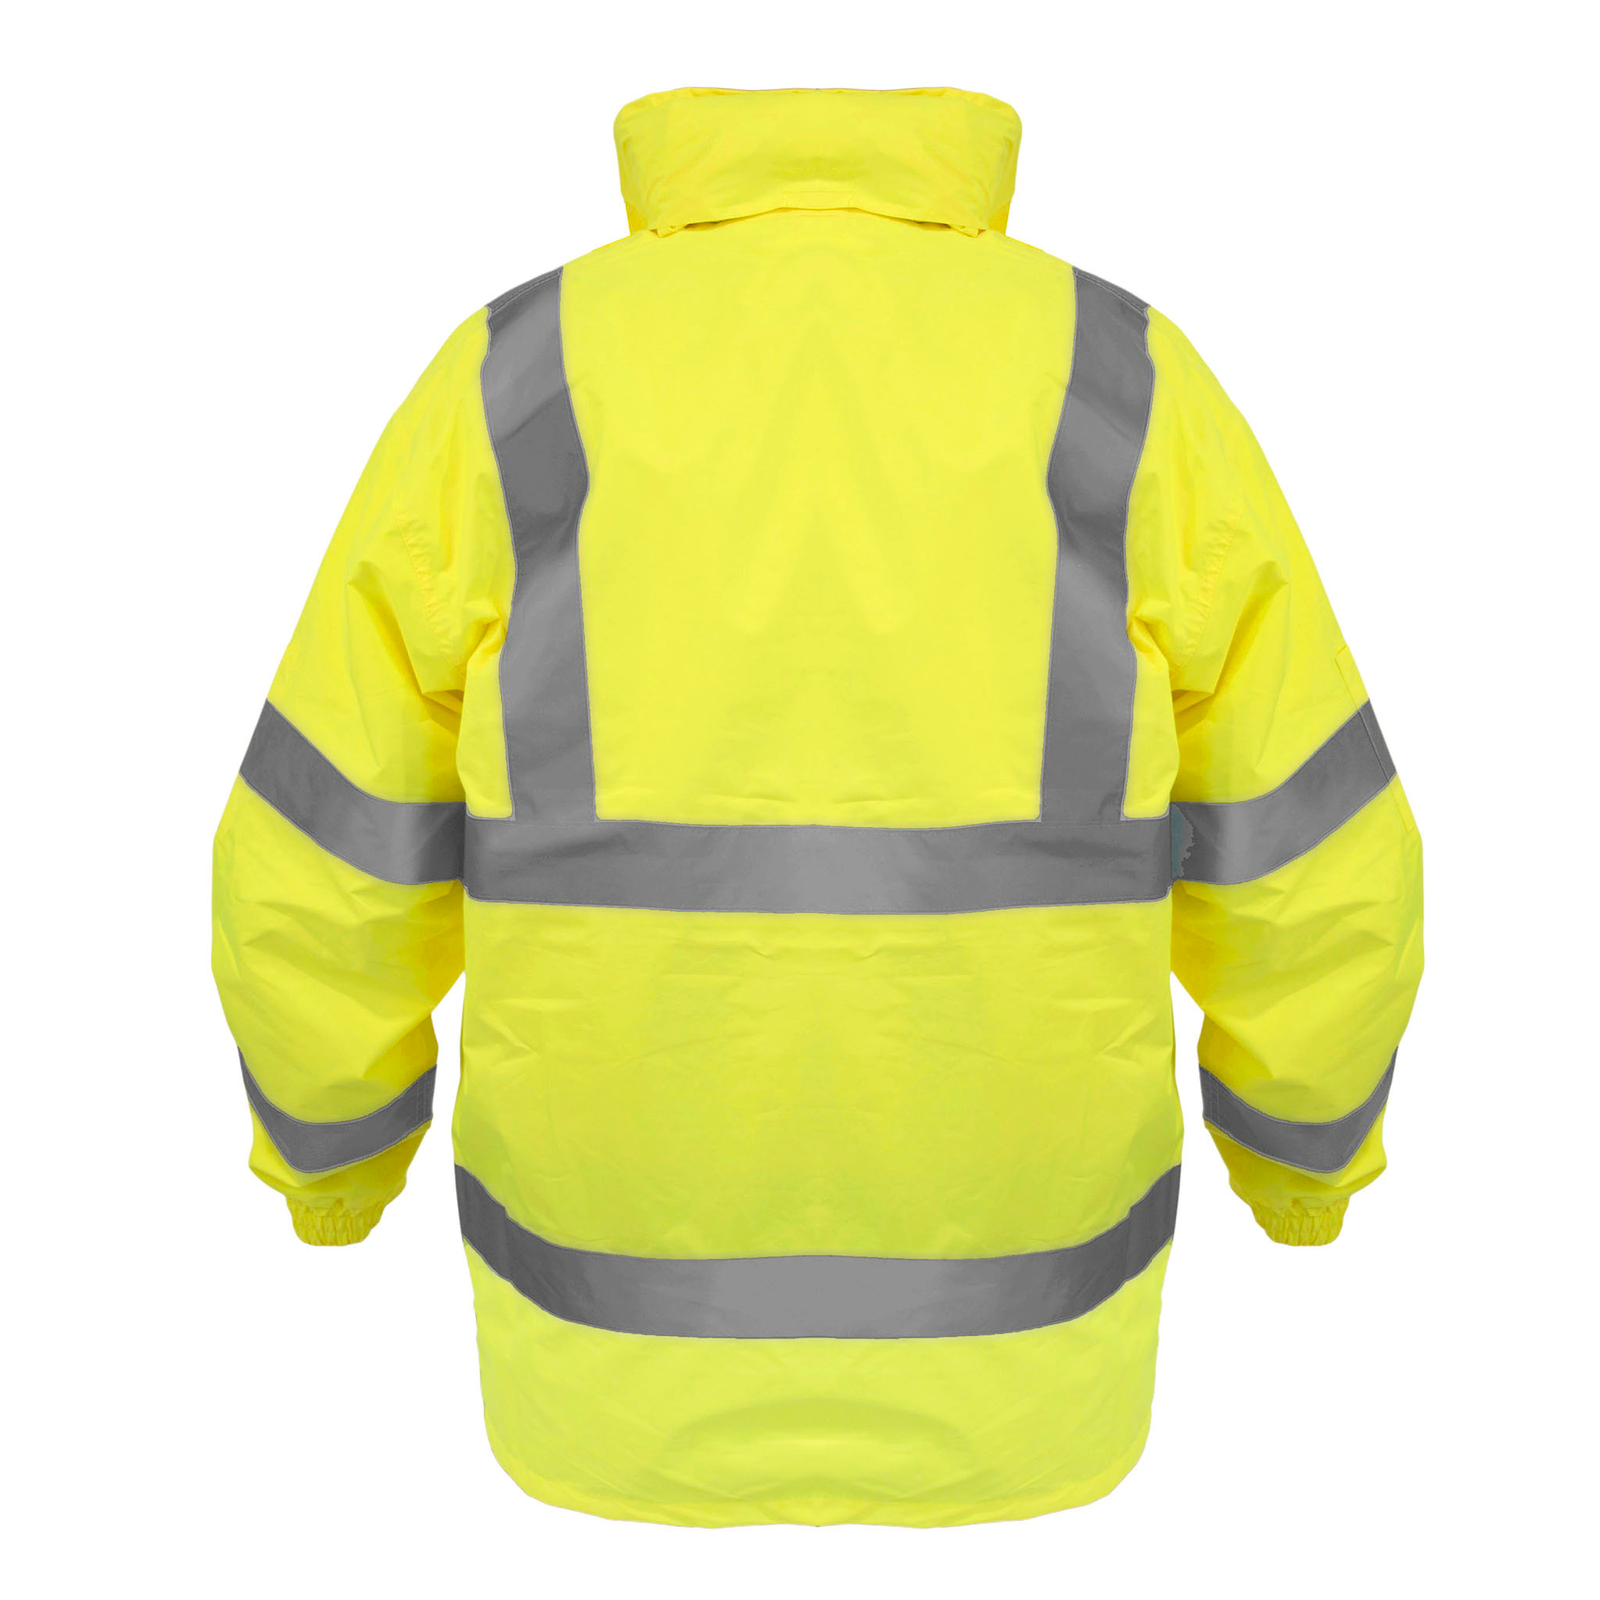 Back view of a JORESTECH High visibility yellow rain jacket with 2 inches reflective strips and hideaway hoodie